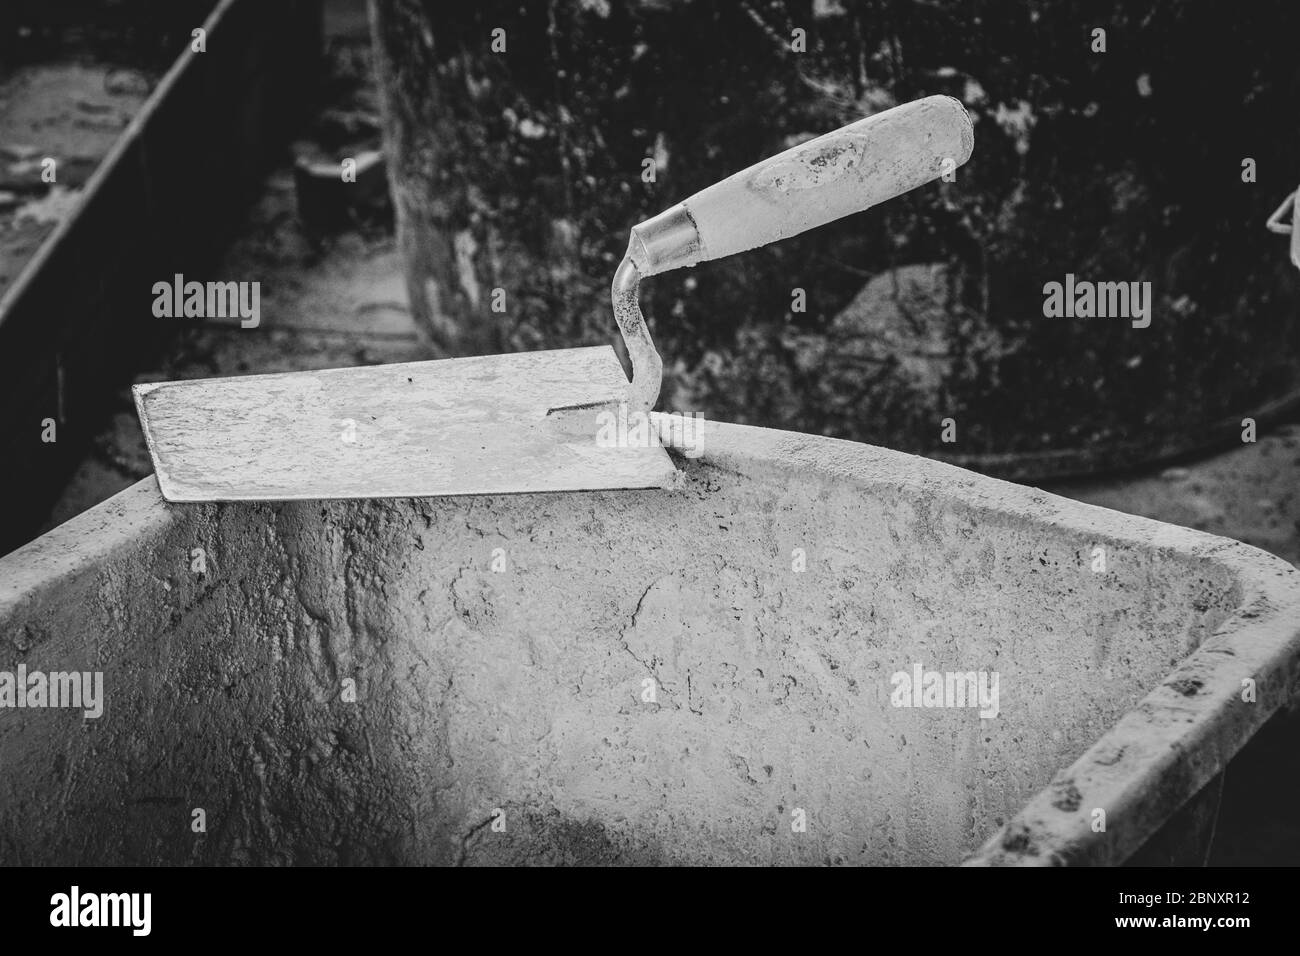 a trowel lies on the edge of a mortar box on a building site Stock Photo